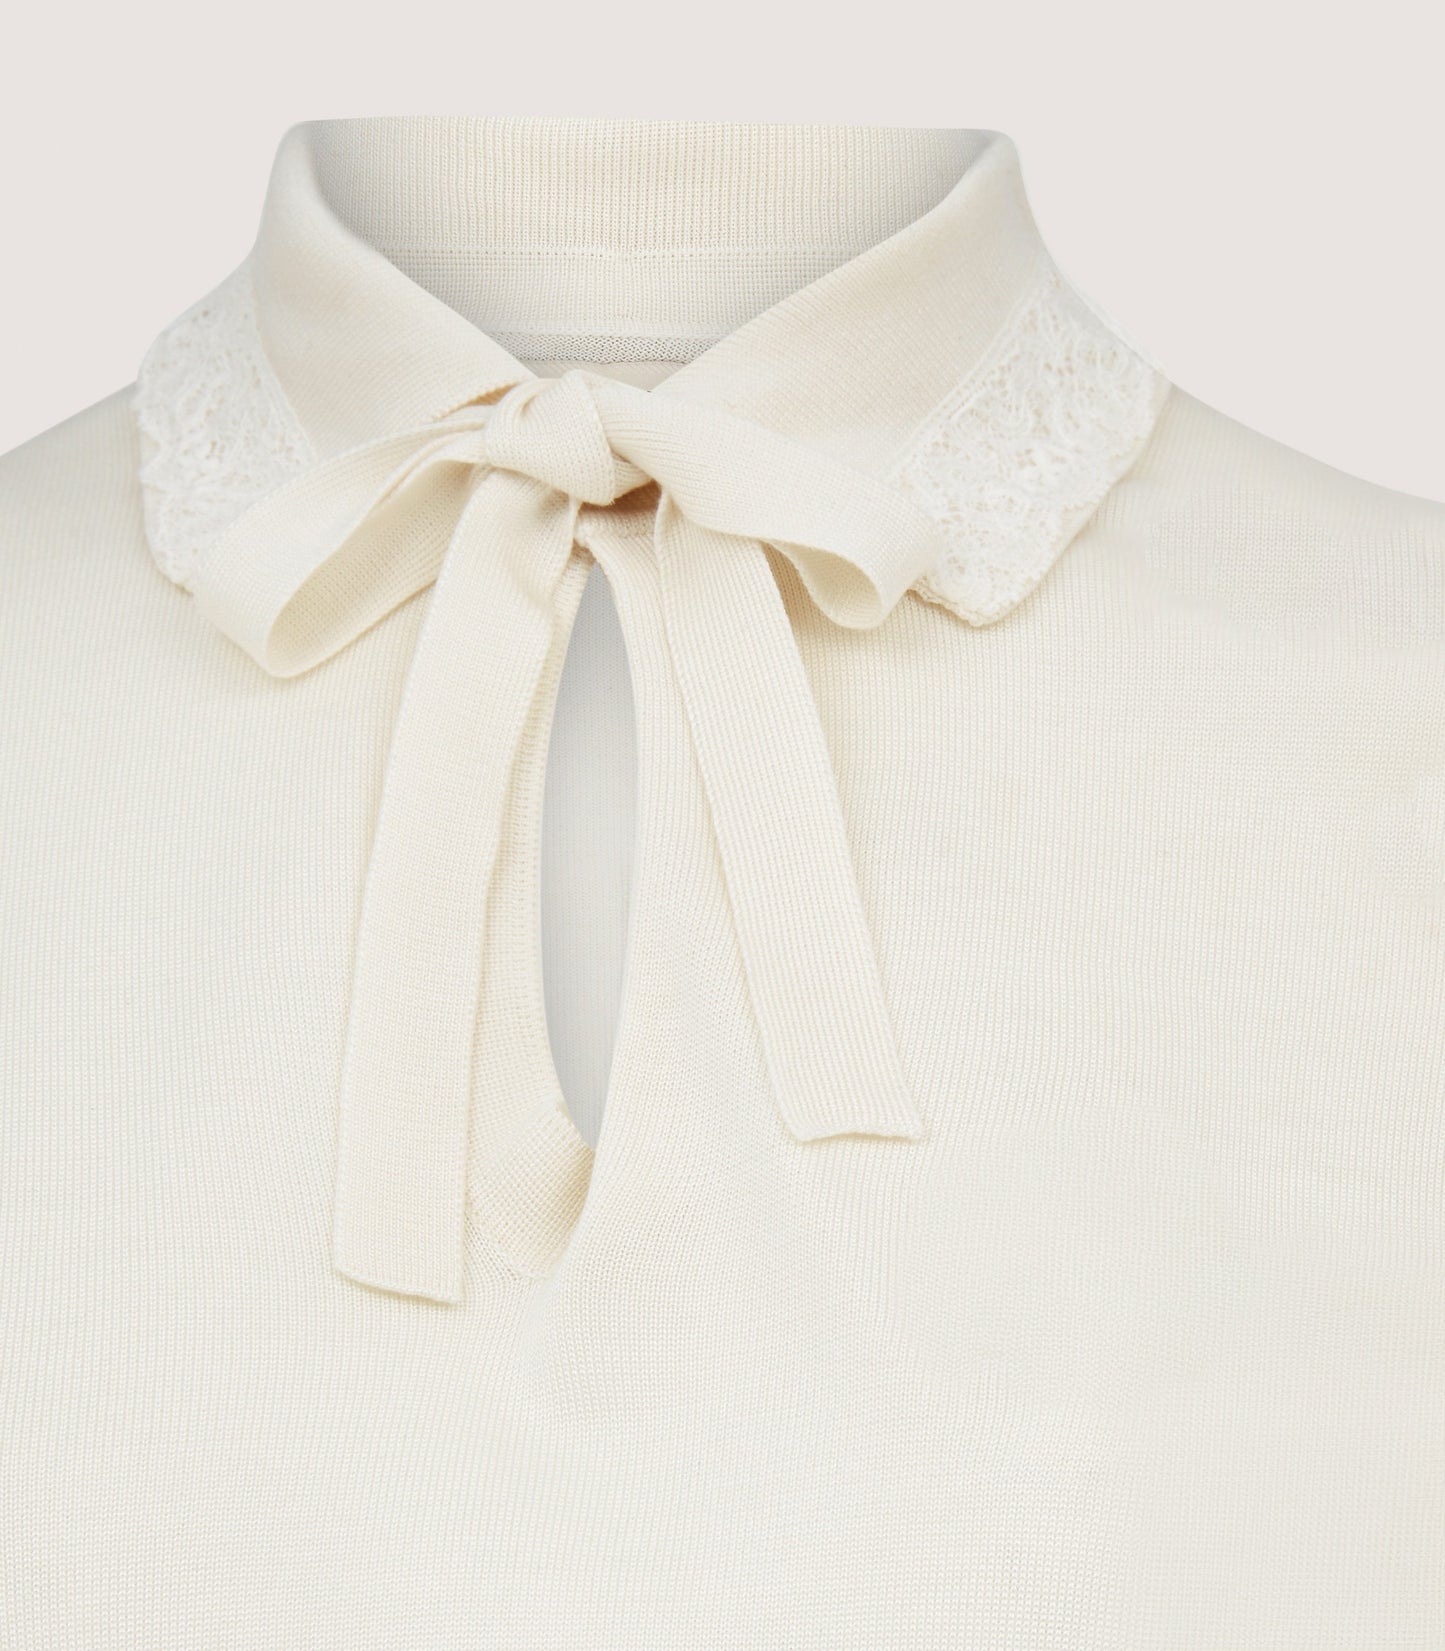 Women's Silk Jersey Polo Shirt with Lace Trim in Ivory